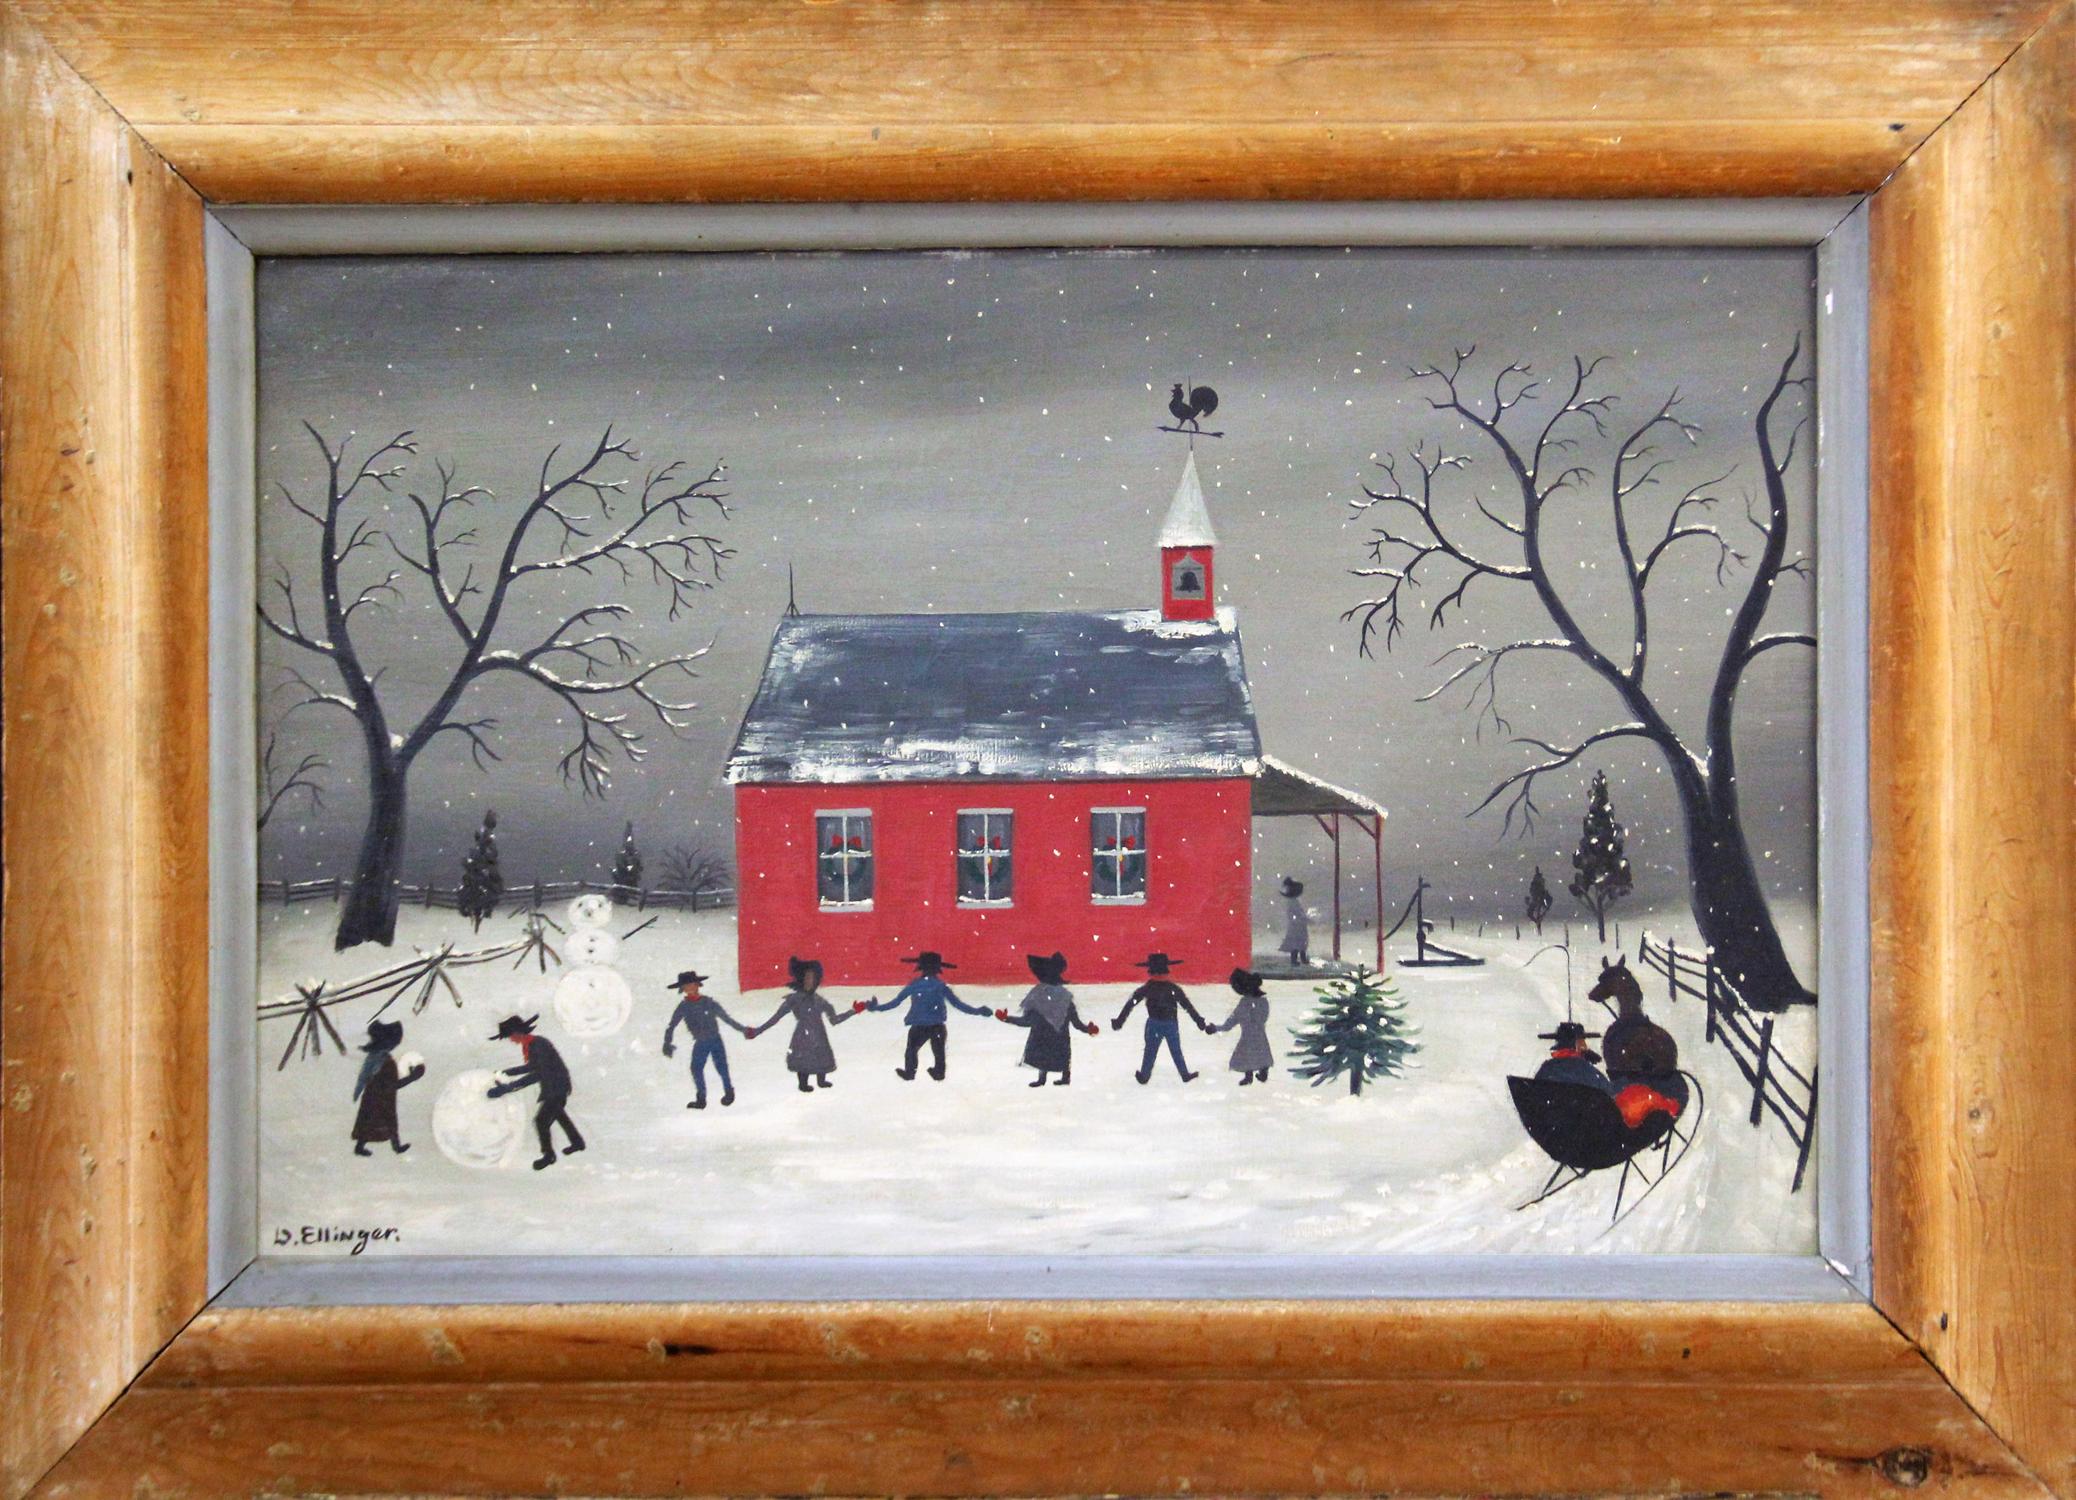 "Amish School" is an oil on canvas painting by Pennsylvania Dutch folk artist and antique dealer, David Ellinger (American, 1913 - 2003).
The 18" x 28" painting of an Amish schoolhouse in a snowy landscape, with children playing in the yard is